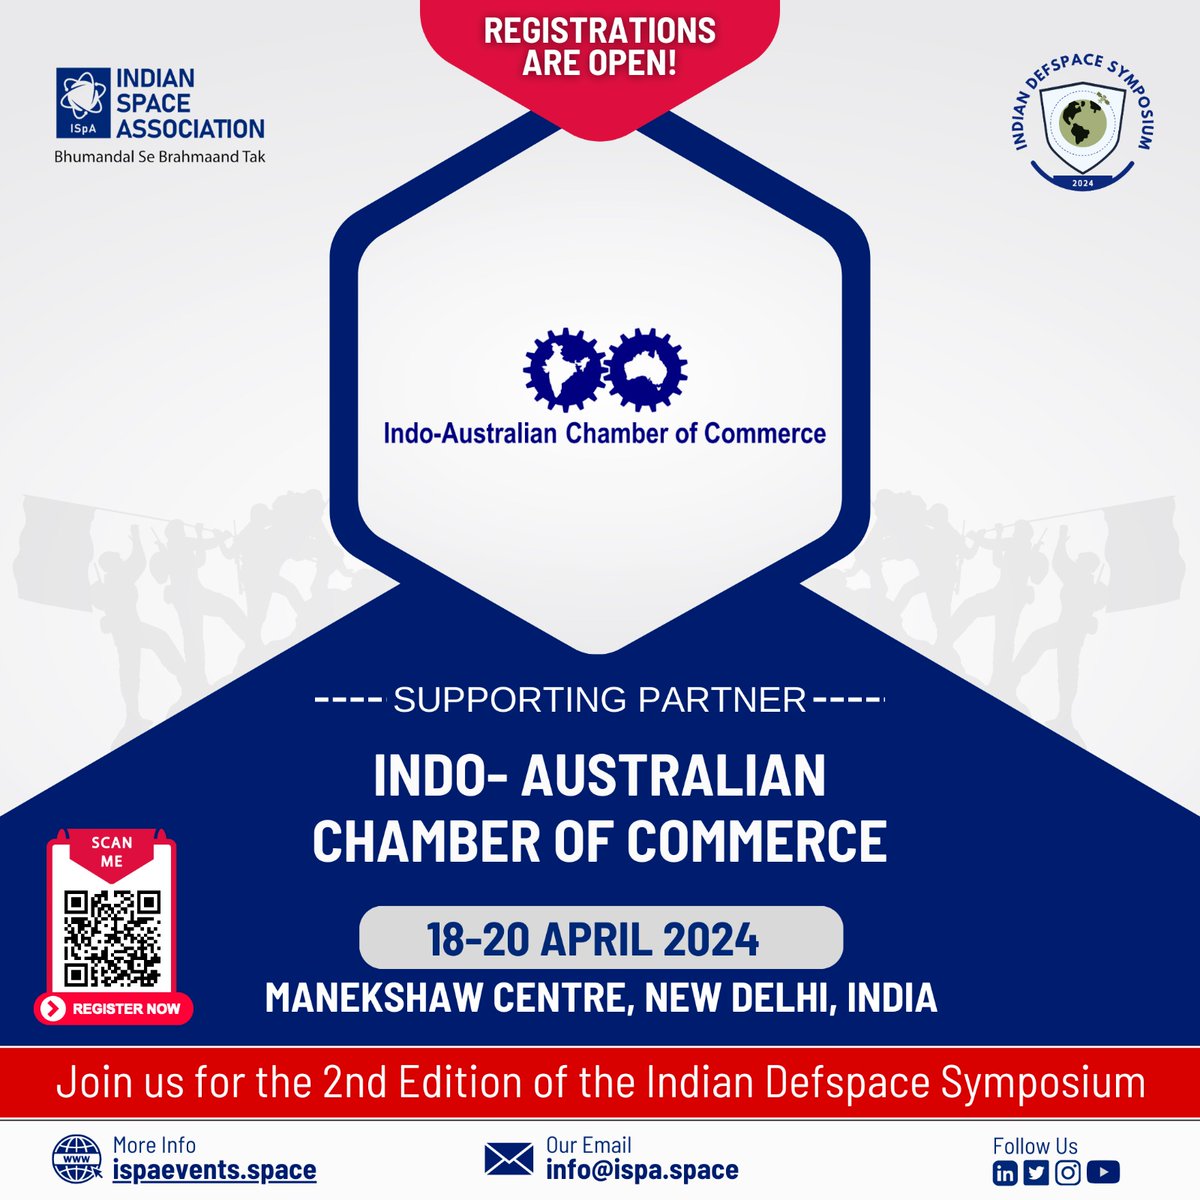 ISpA- Indian Space Association Welcomes @IndoAustChamber as a supporting partner for Indian DefSpace Symposium 2024, 18-20 April, Manekshaw Centre, New Delhi, India. For registration, Scan the QR code or visit ispaevents.space.